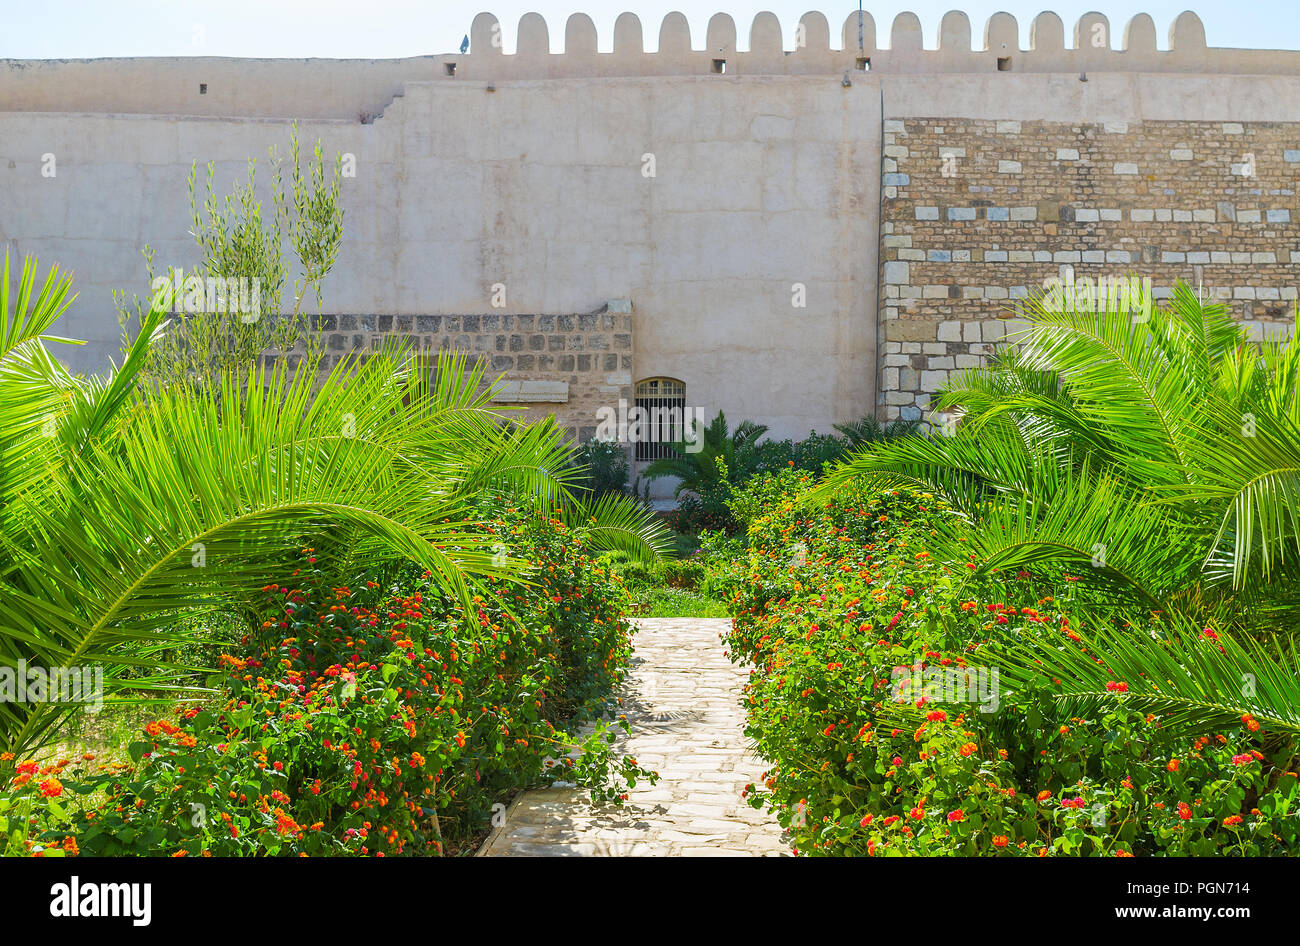 The Kasbah of Sousse boasts scenic garden with palms and lush flower beds along the narrow stone alleys, Tunisia. Stock Photo